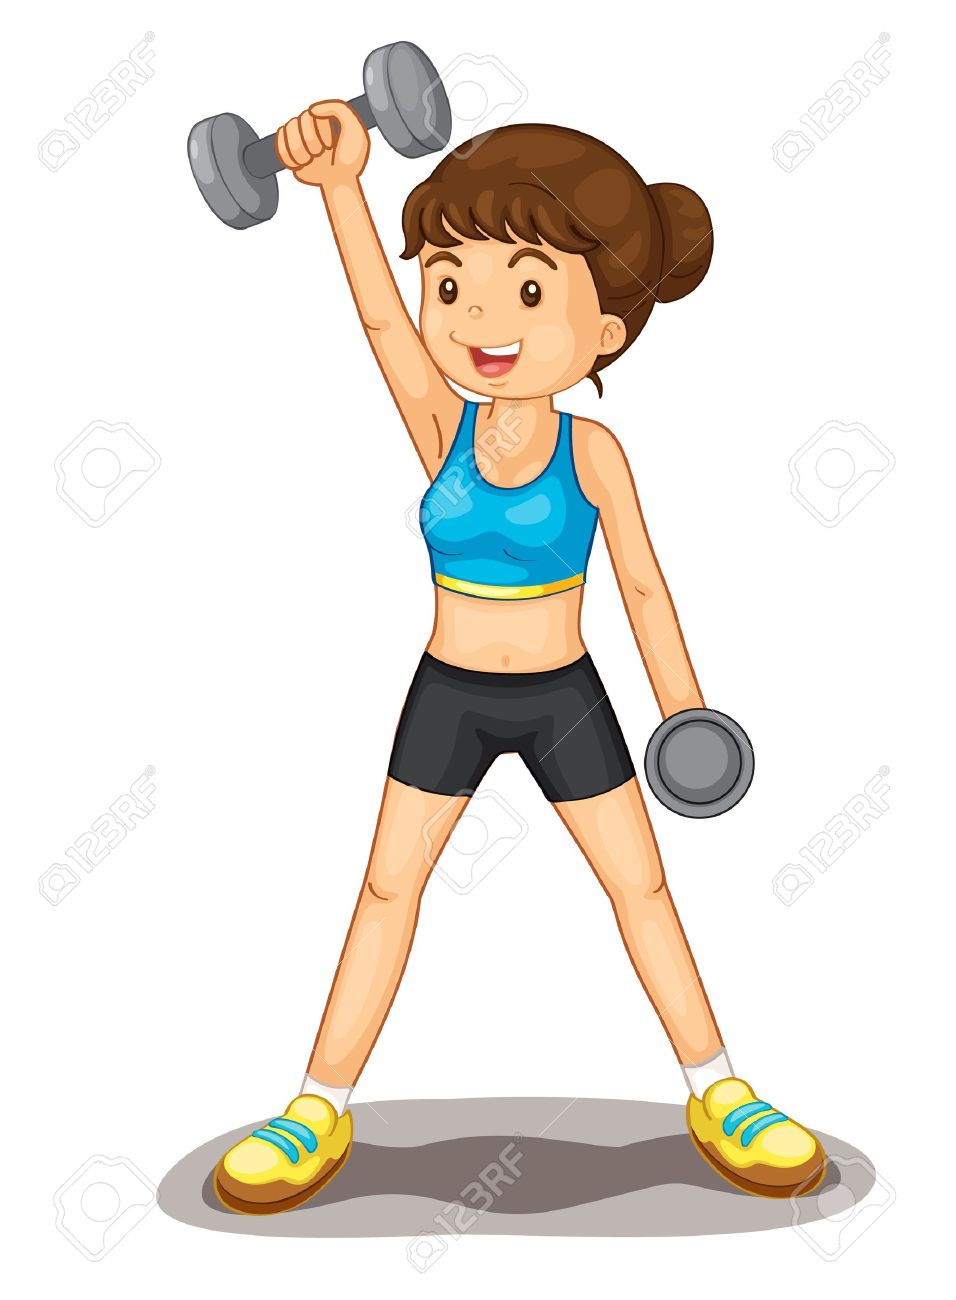 Exercise clipart animated, Exercise animated Transparent